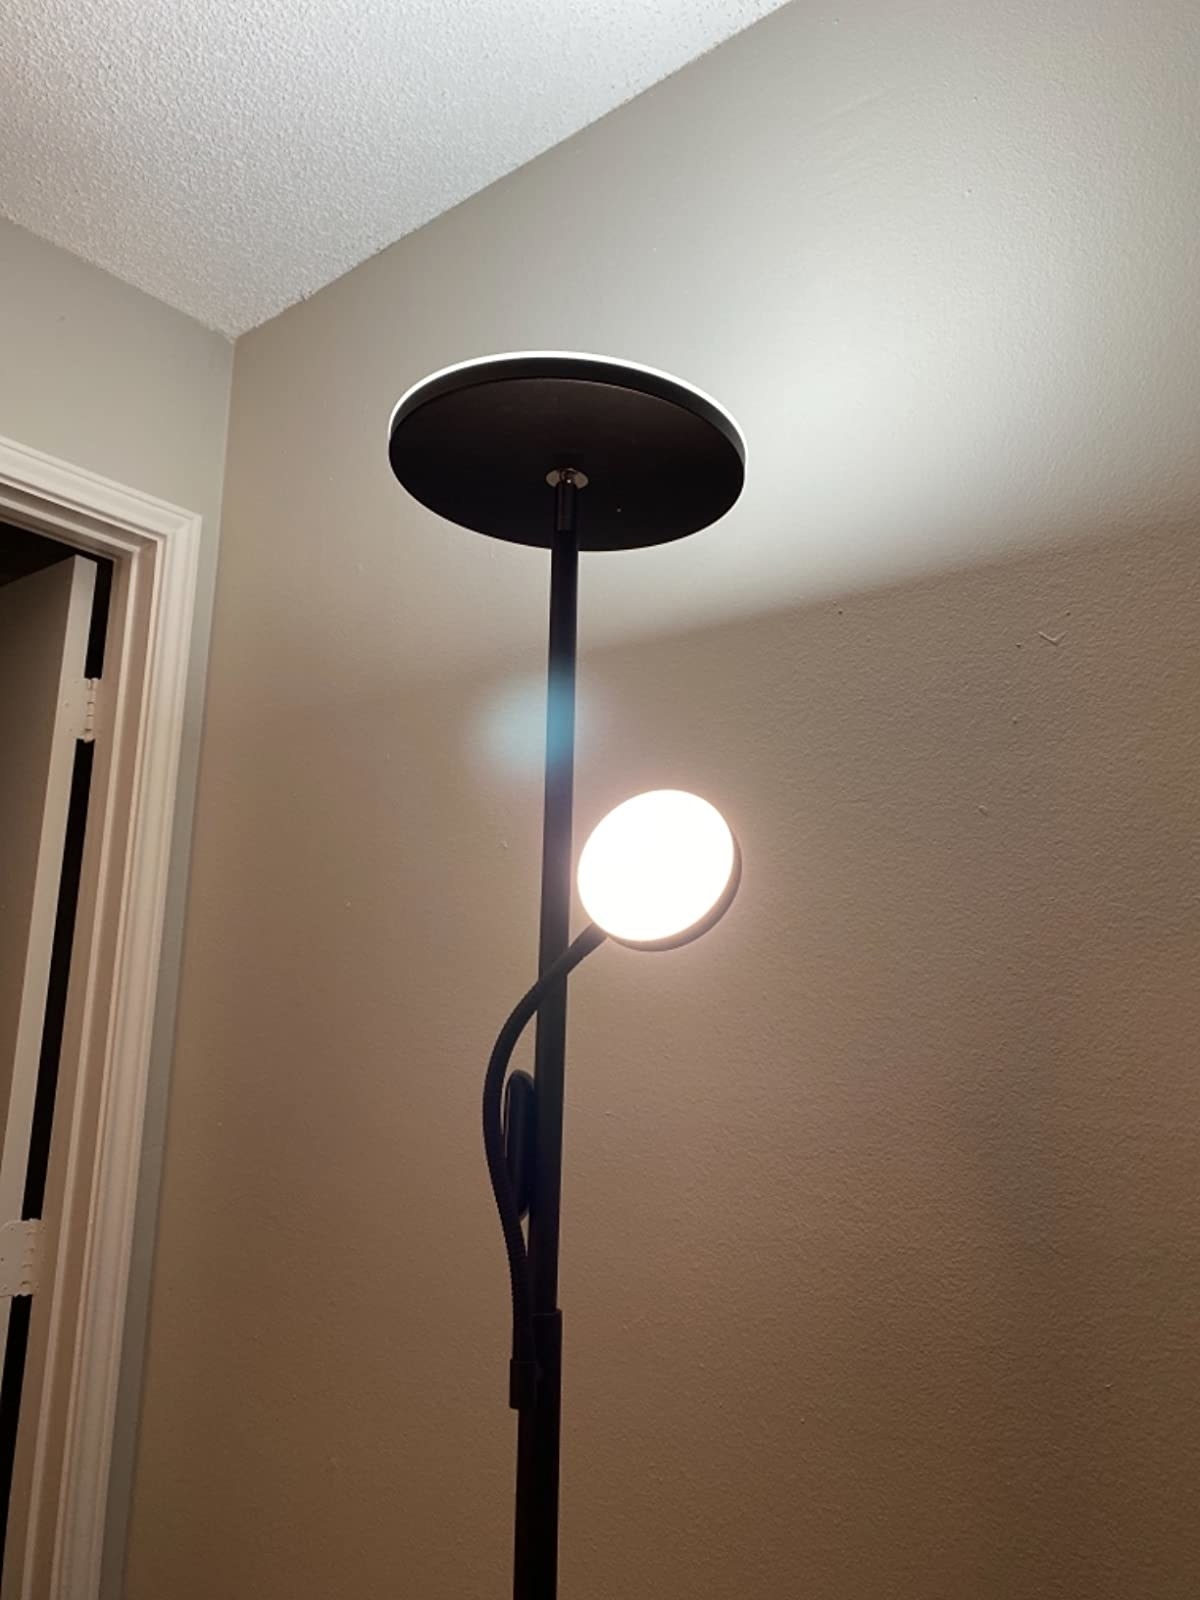 The lamp, on